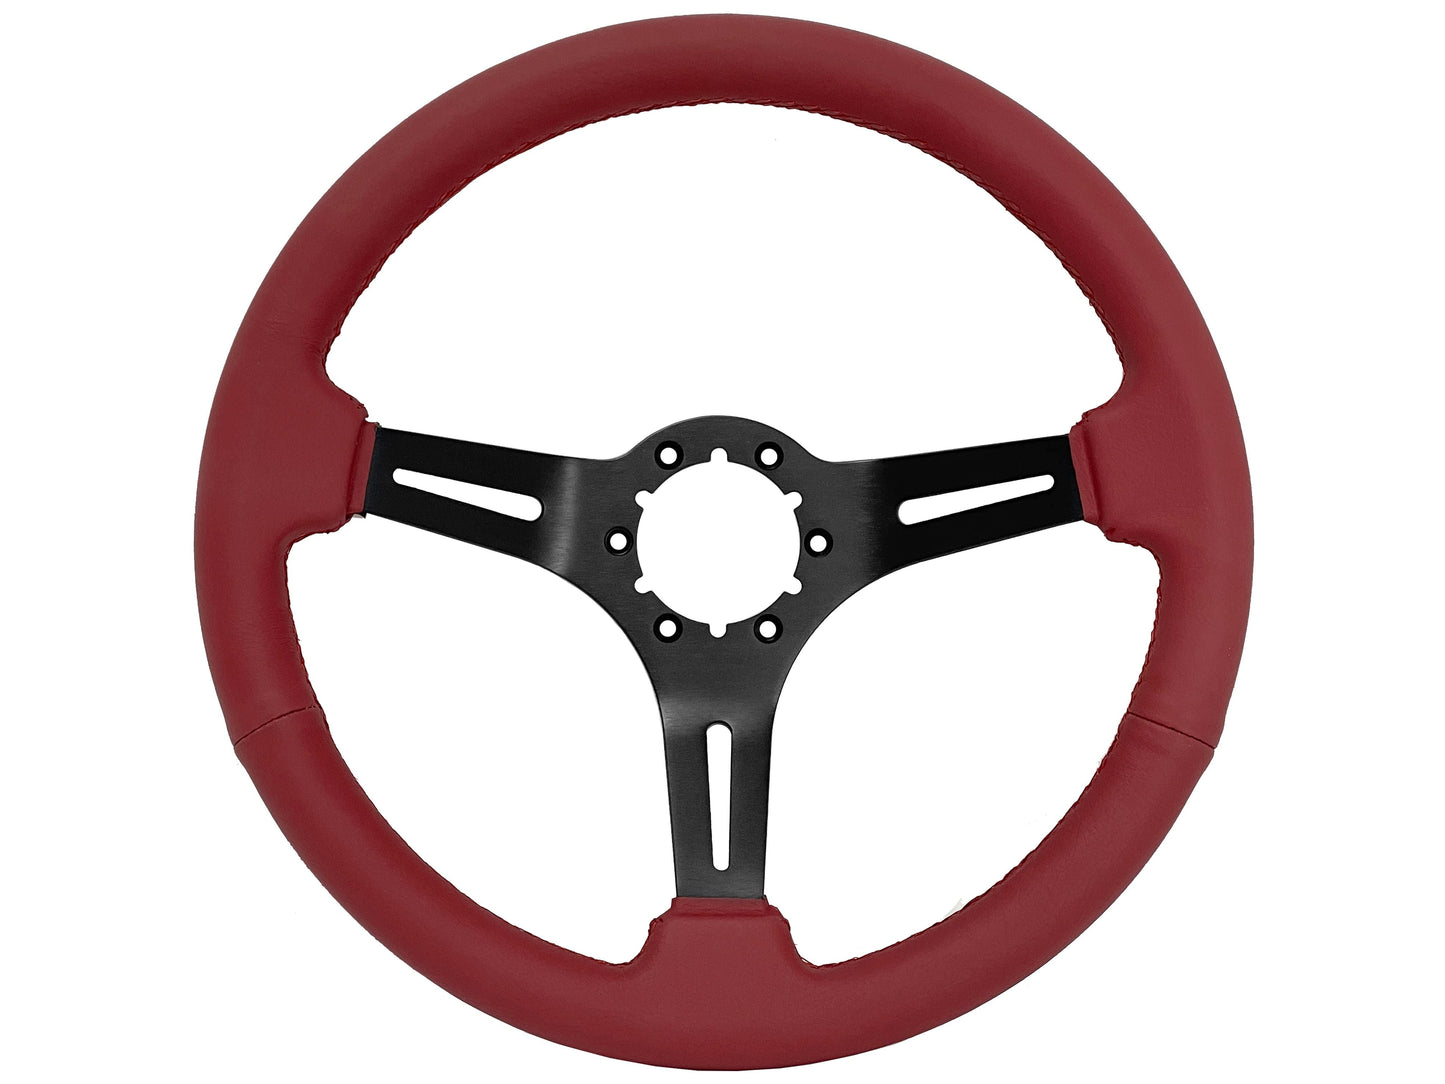 1969-89 Buick Telescopic Steering Wheel Kit | Red Leather | ST3060RED